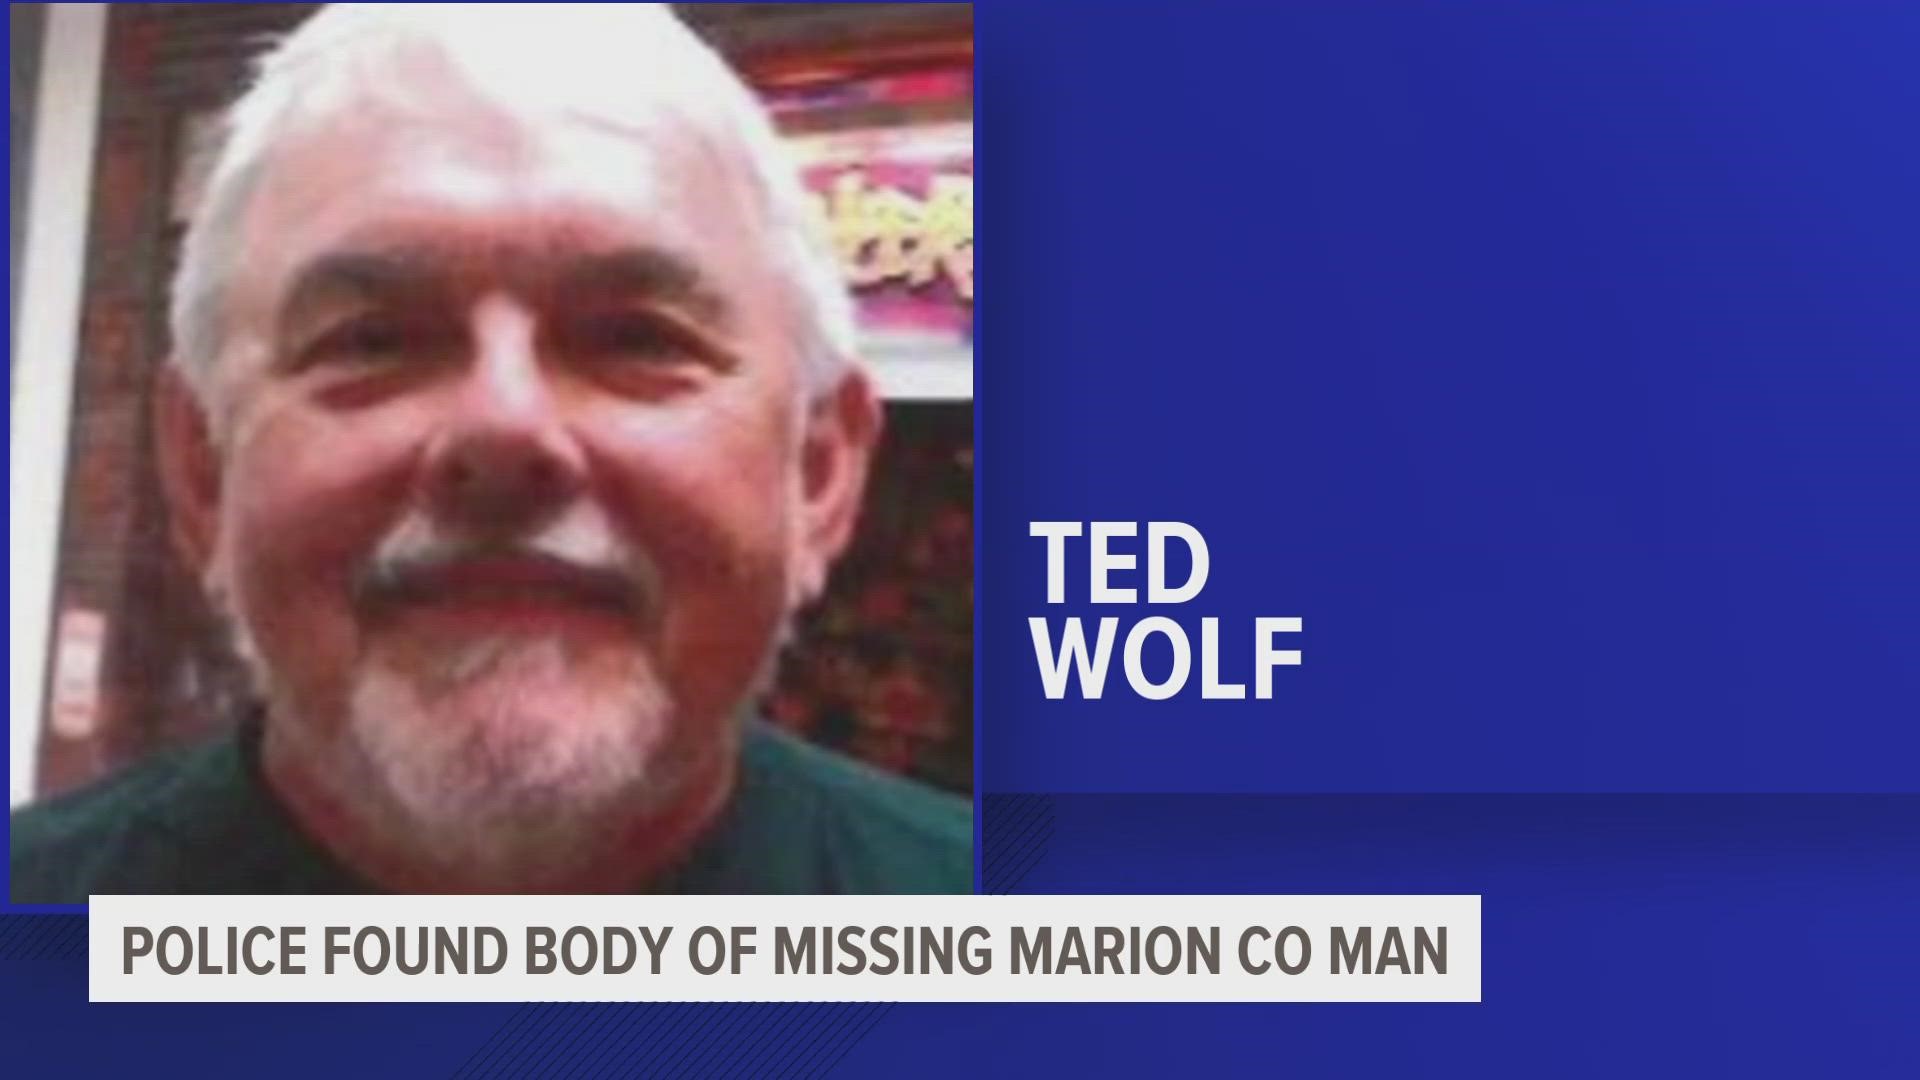 83-year-old Theodore "Ted" Wolf had been missing since Monday, Jan. 16, according to the Marion Police Department and Iowa Department of Public Safety.